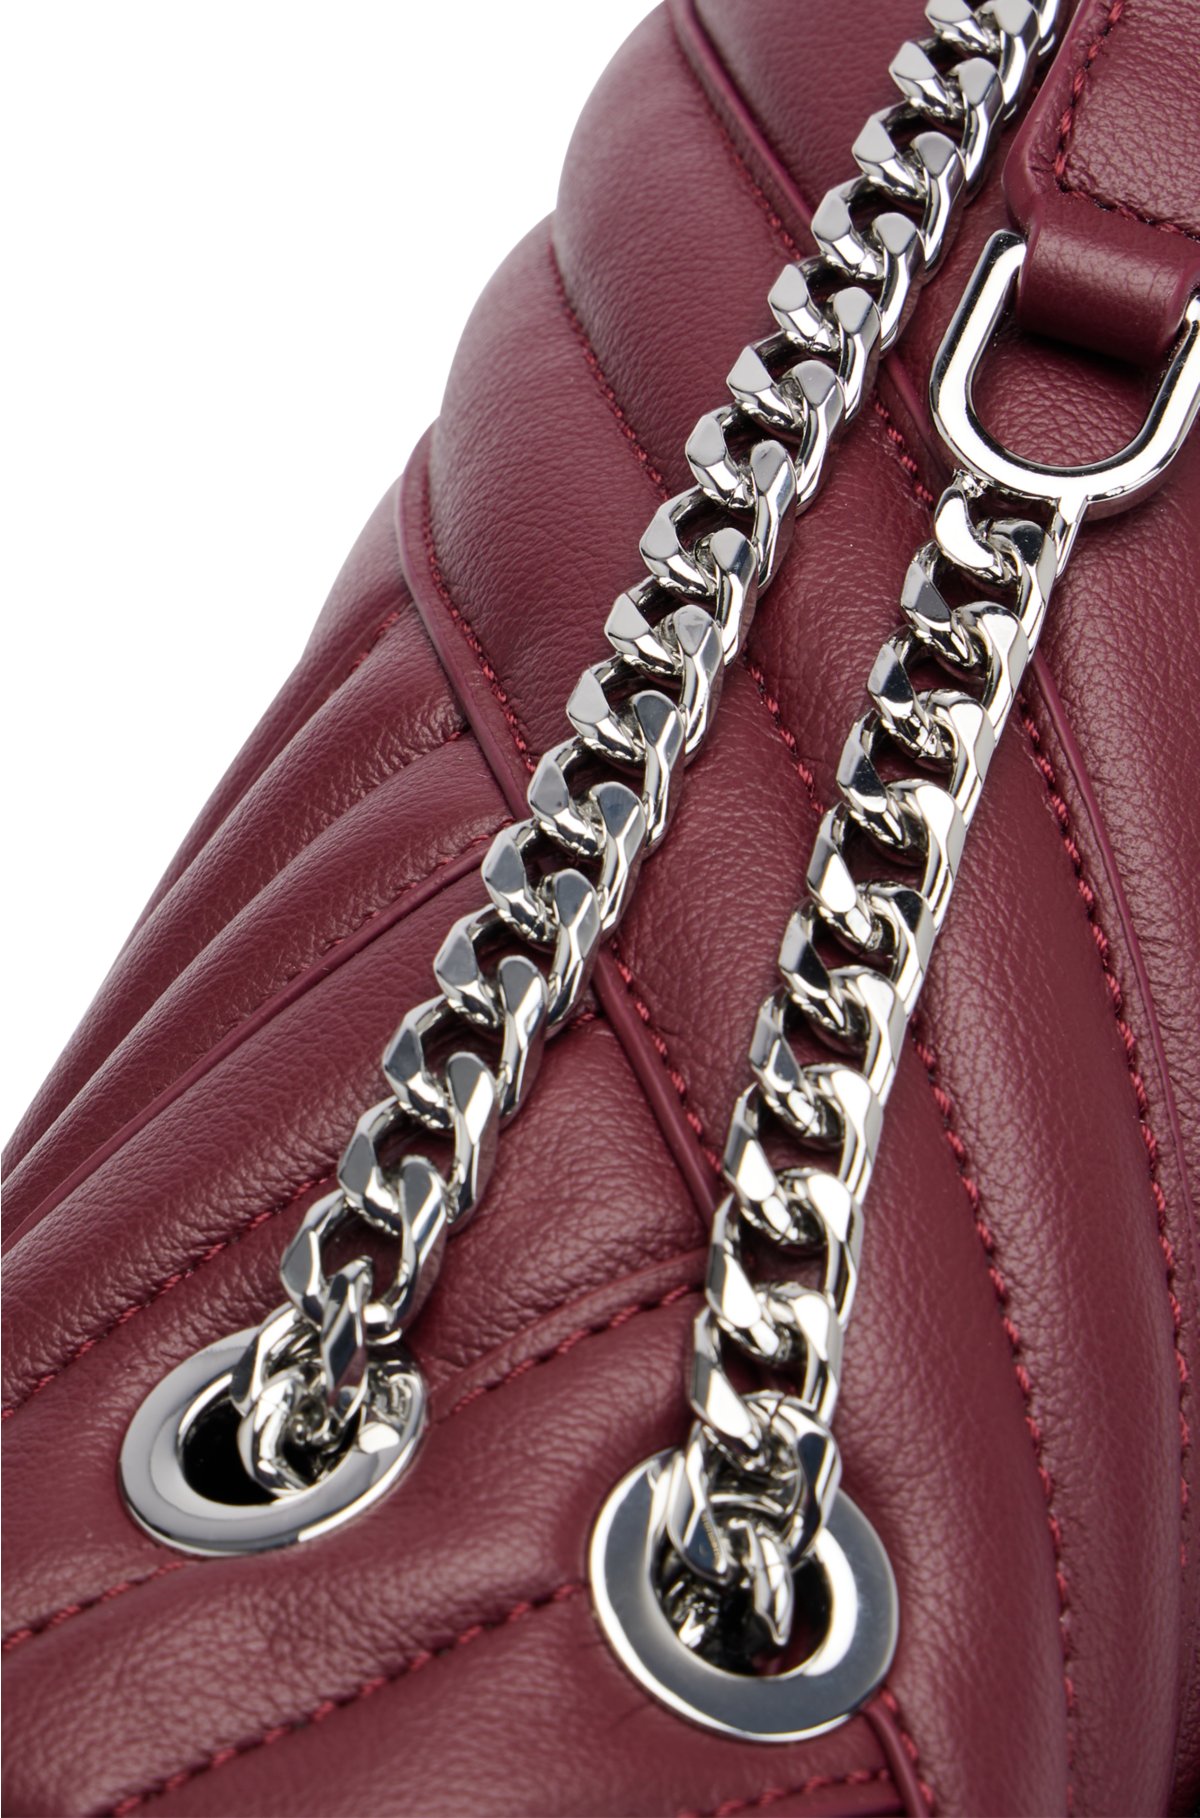 SOLD online - New in! Chanel 2019 burgundy red flap bag with top